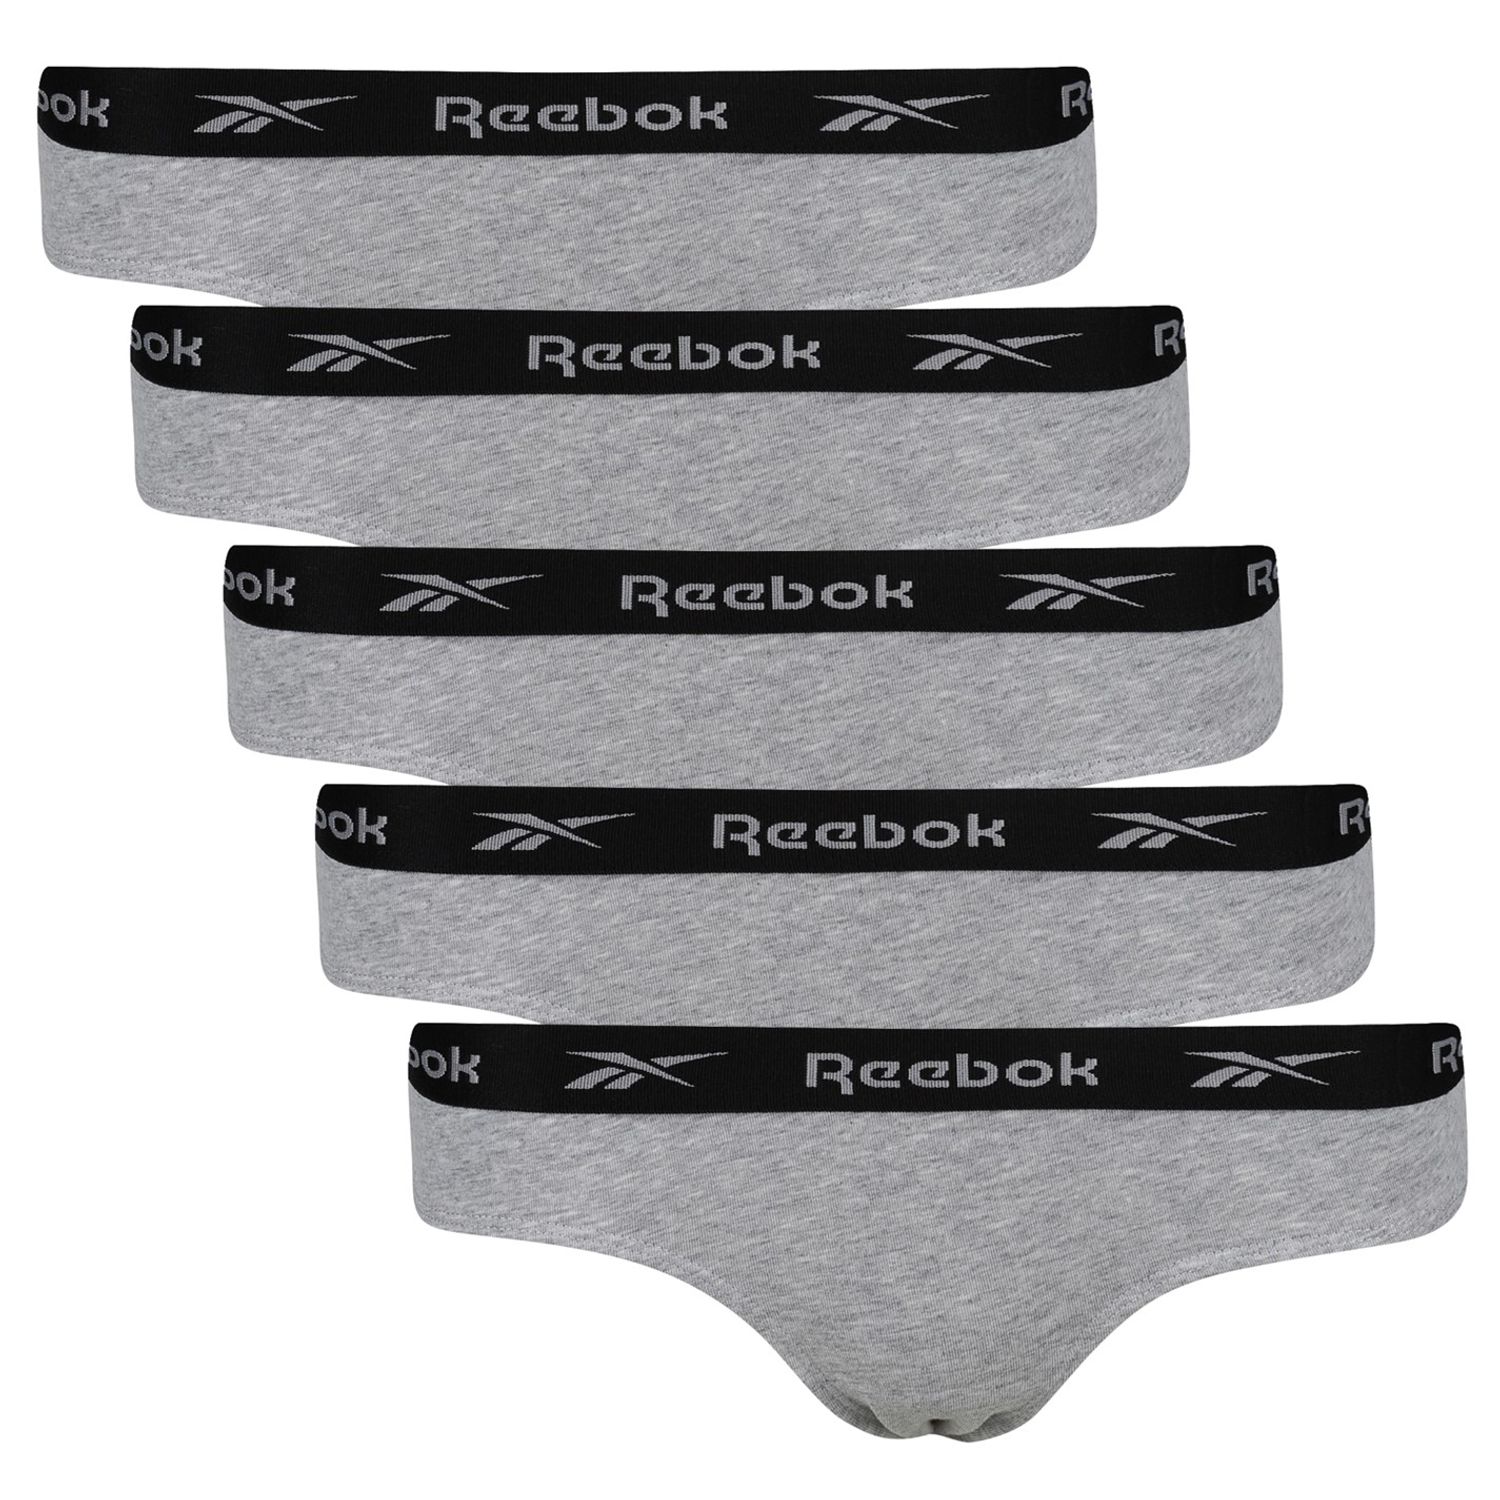 Multi colour Reebok 3 Pack Cotton Thong - Get The Label